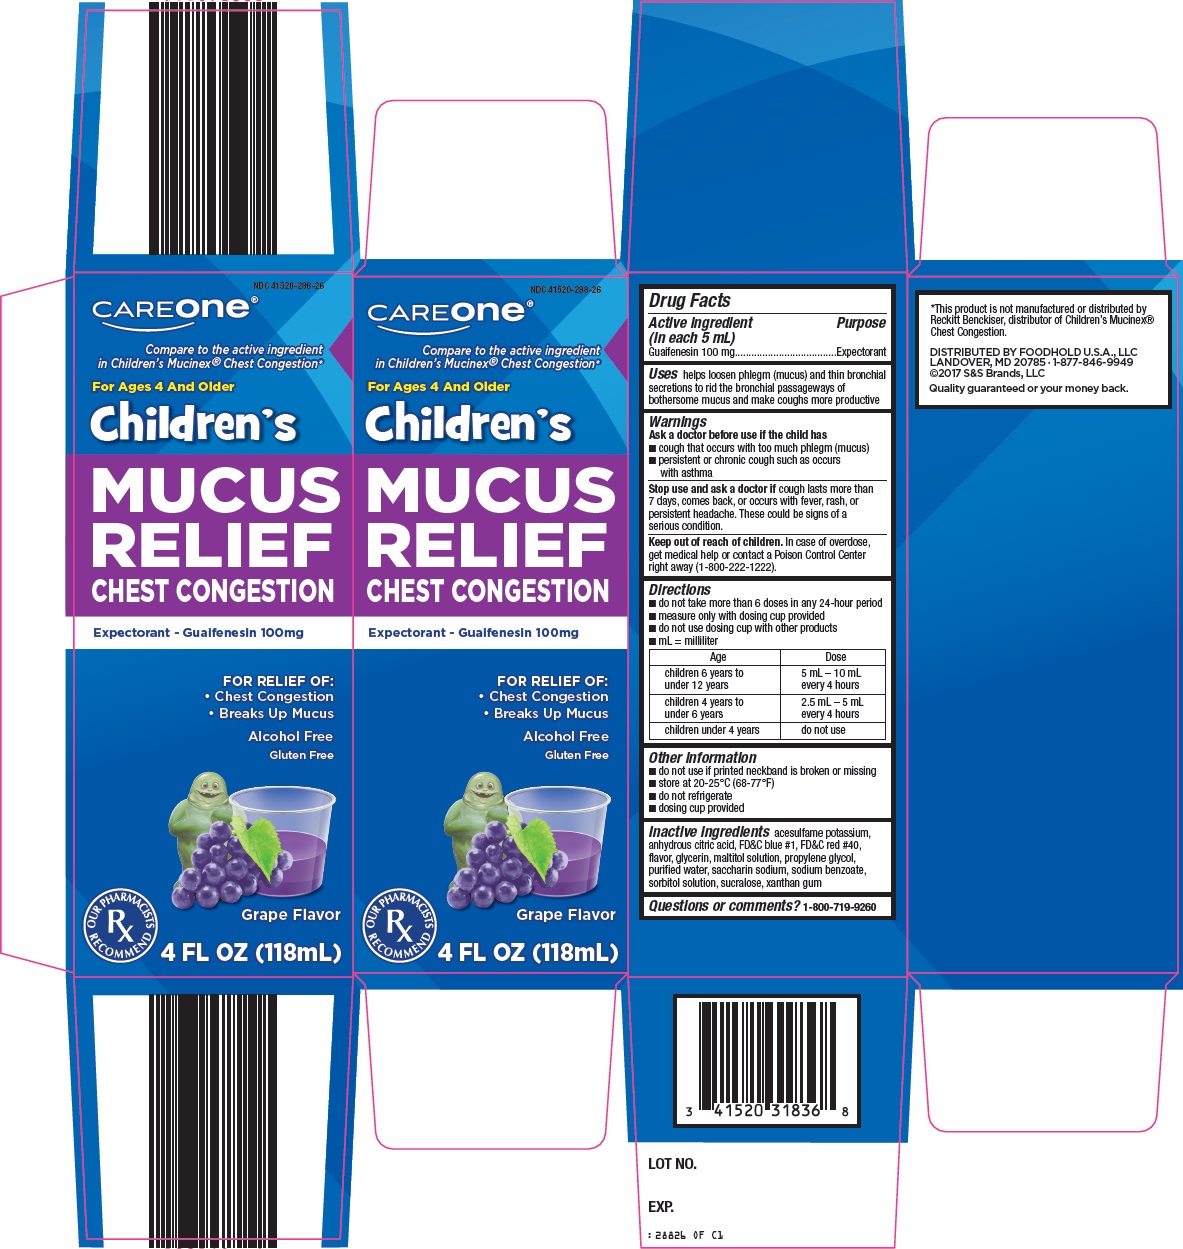 childrens mucus relief image